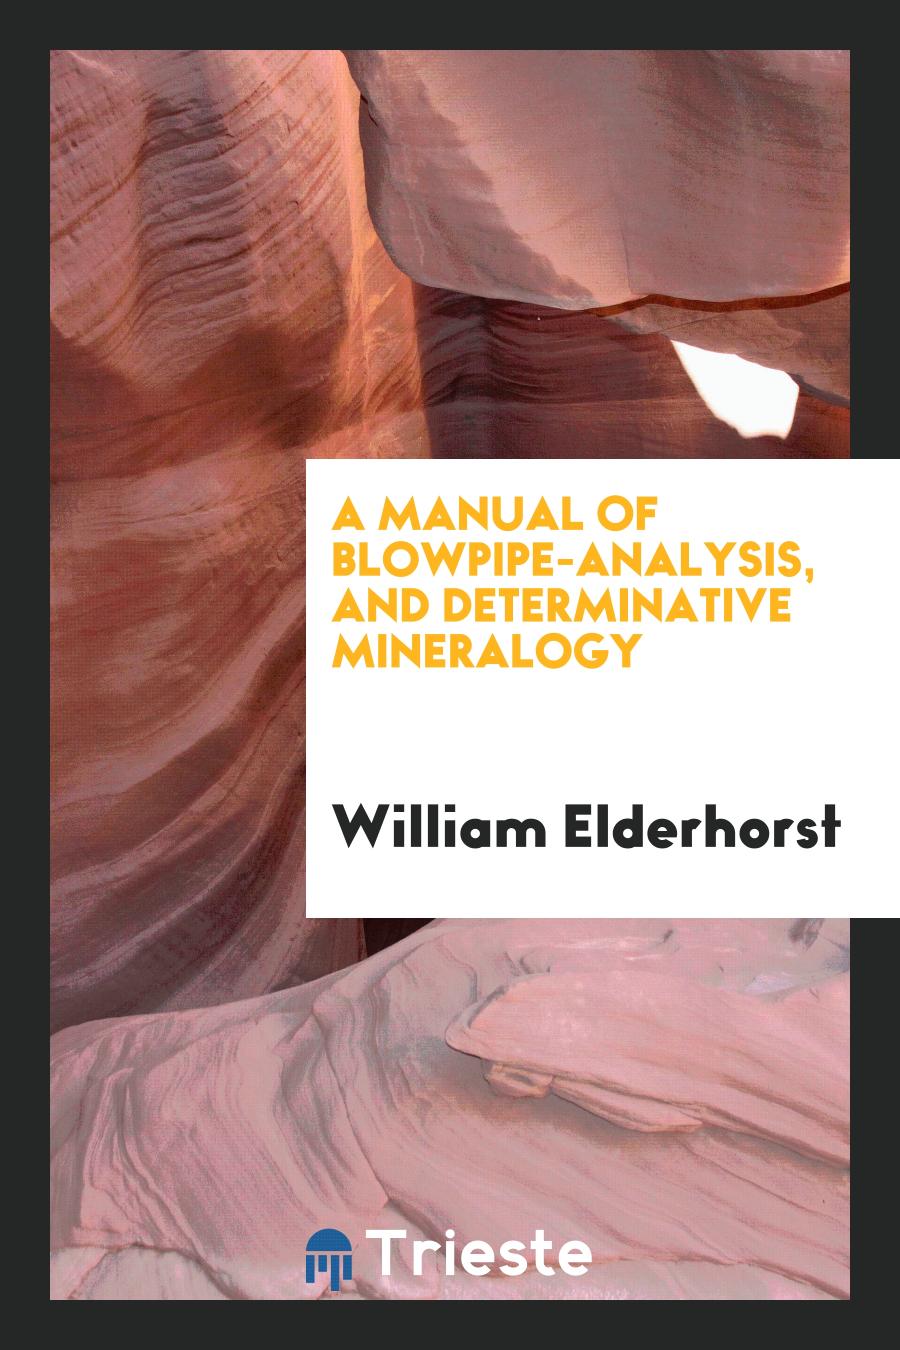 A Manual of Blowpipe-Analysis, and Determinative Mineralogy